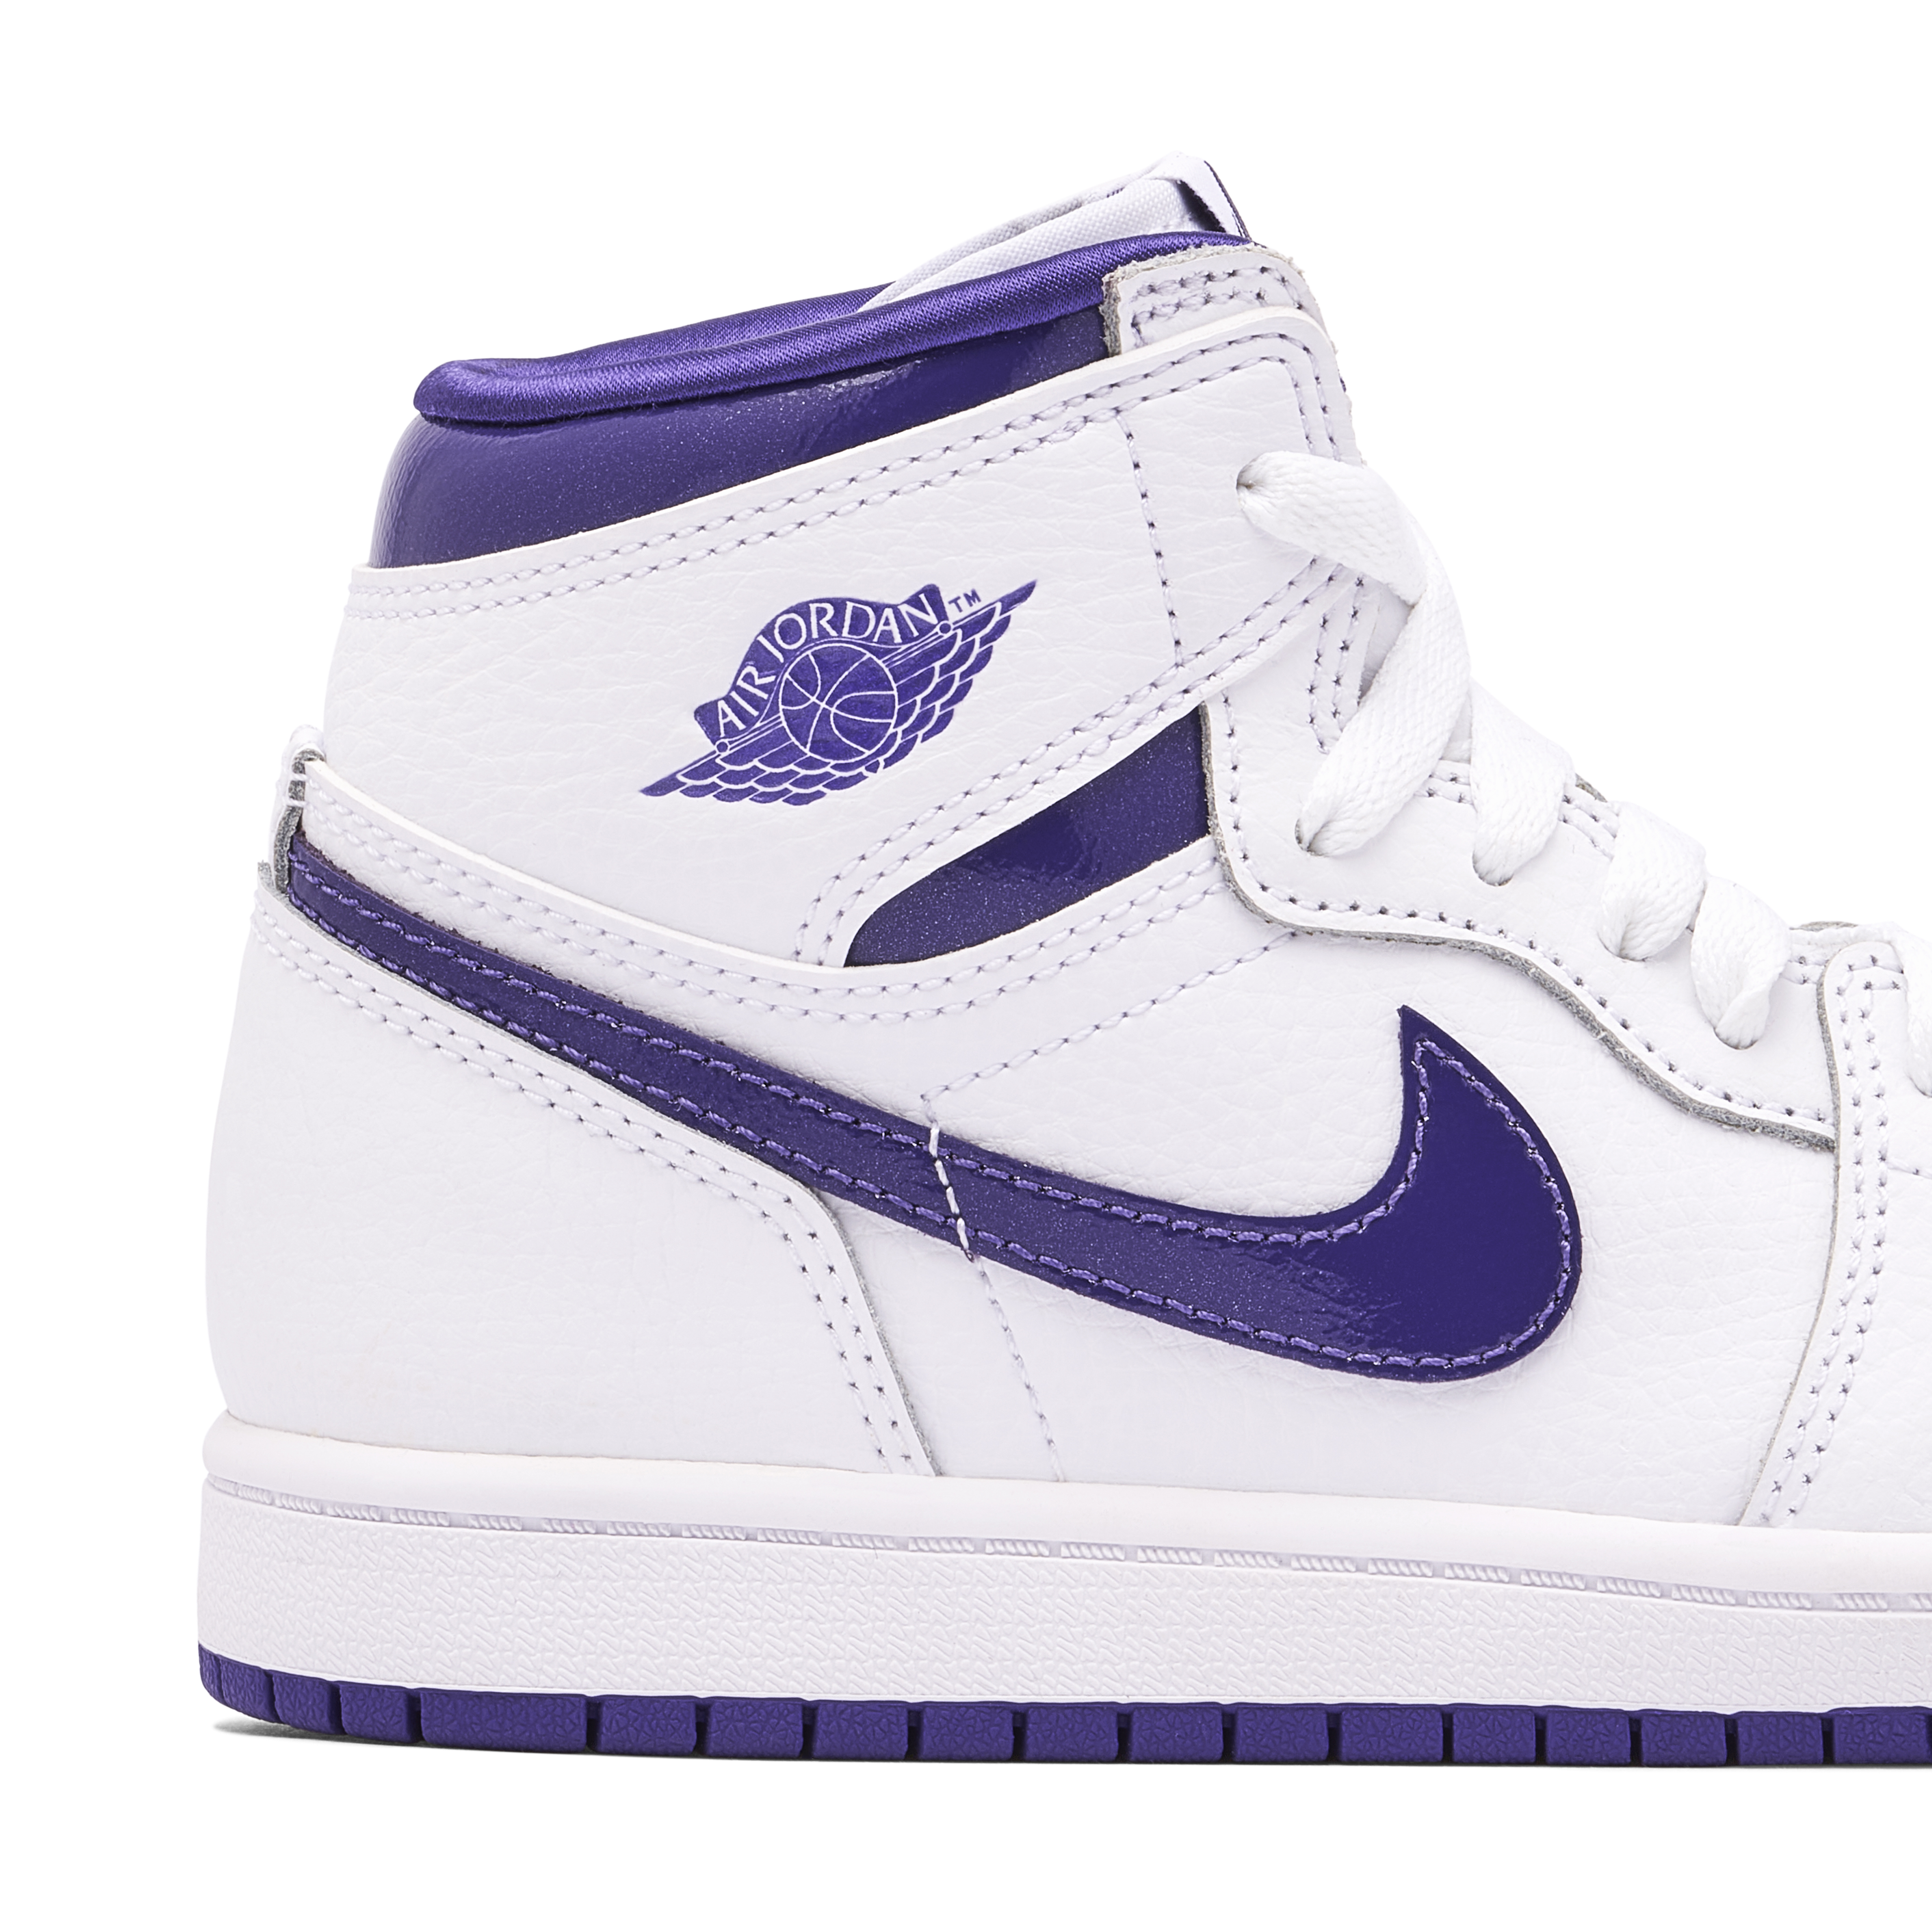 Dissecting materials with the Jordan 1 Court Purple, Details